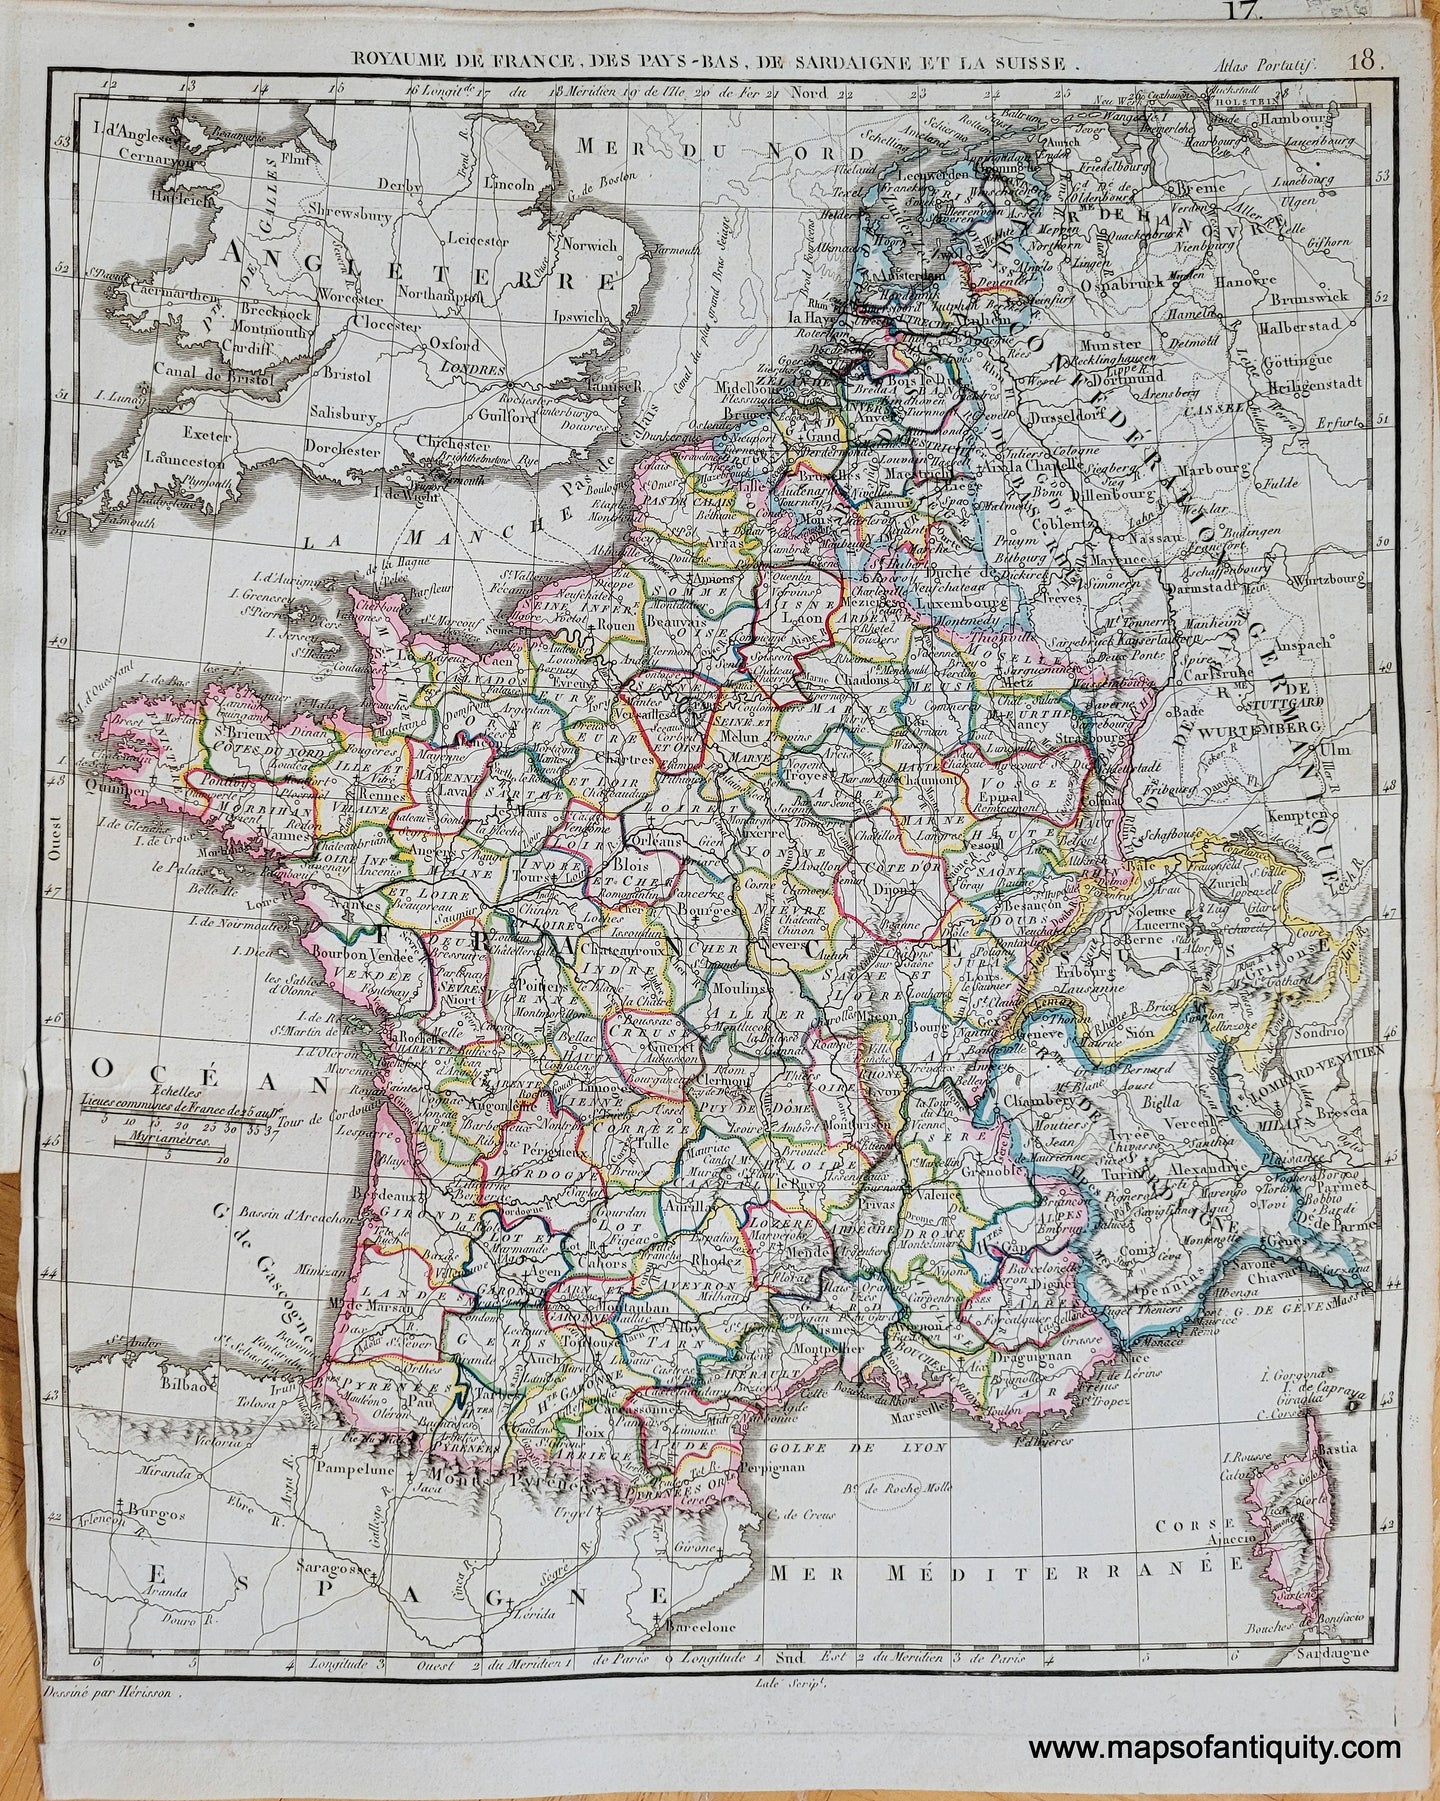 Genuine-Antique-Map-Kingdom-of-France-The-Netherlands-Sardinia-and-Switzerland-France-Holland-The-Netherlands-1816-Herisson-Maps-Of-Antiquity-1800s-19th-century